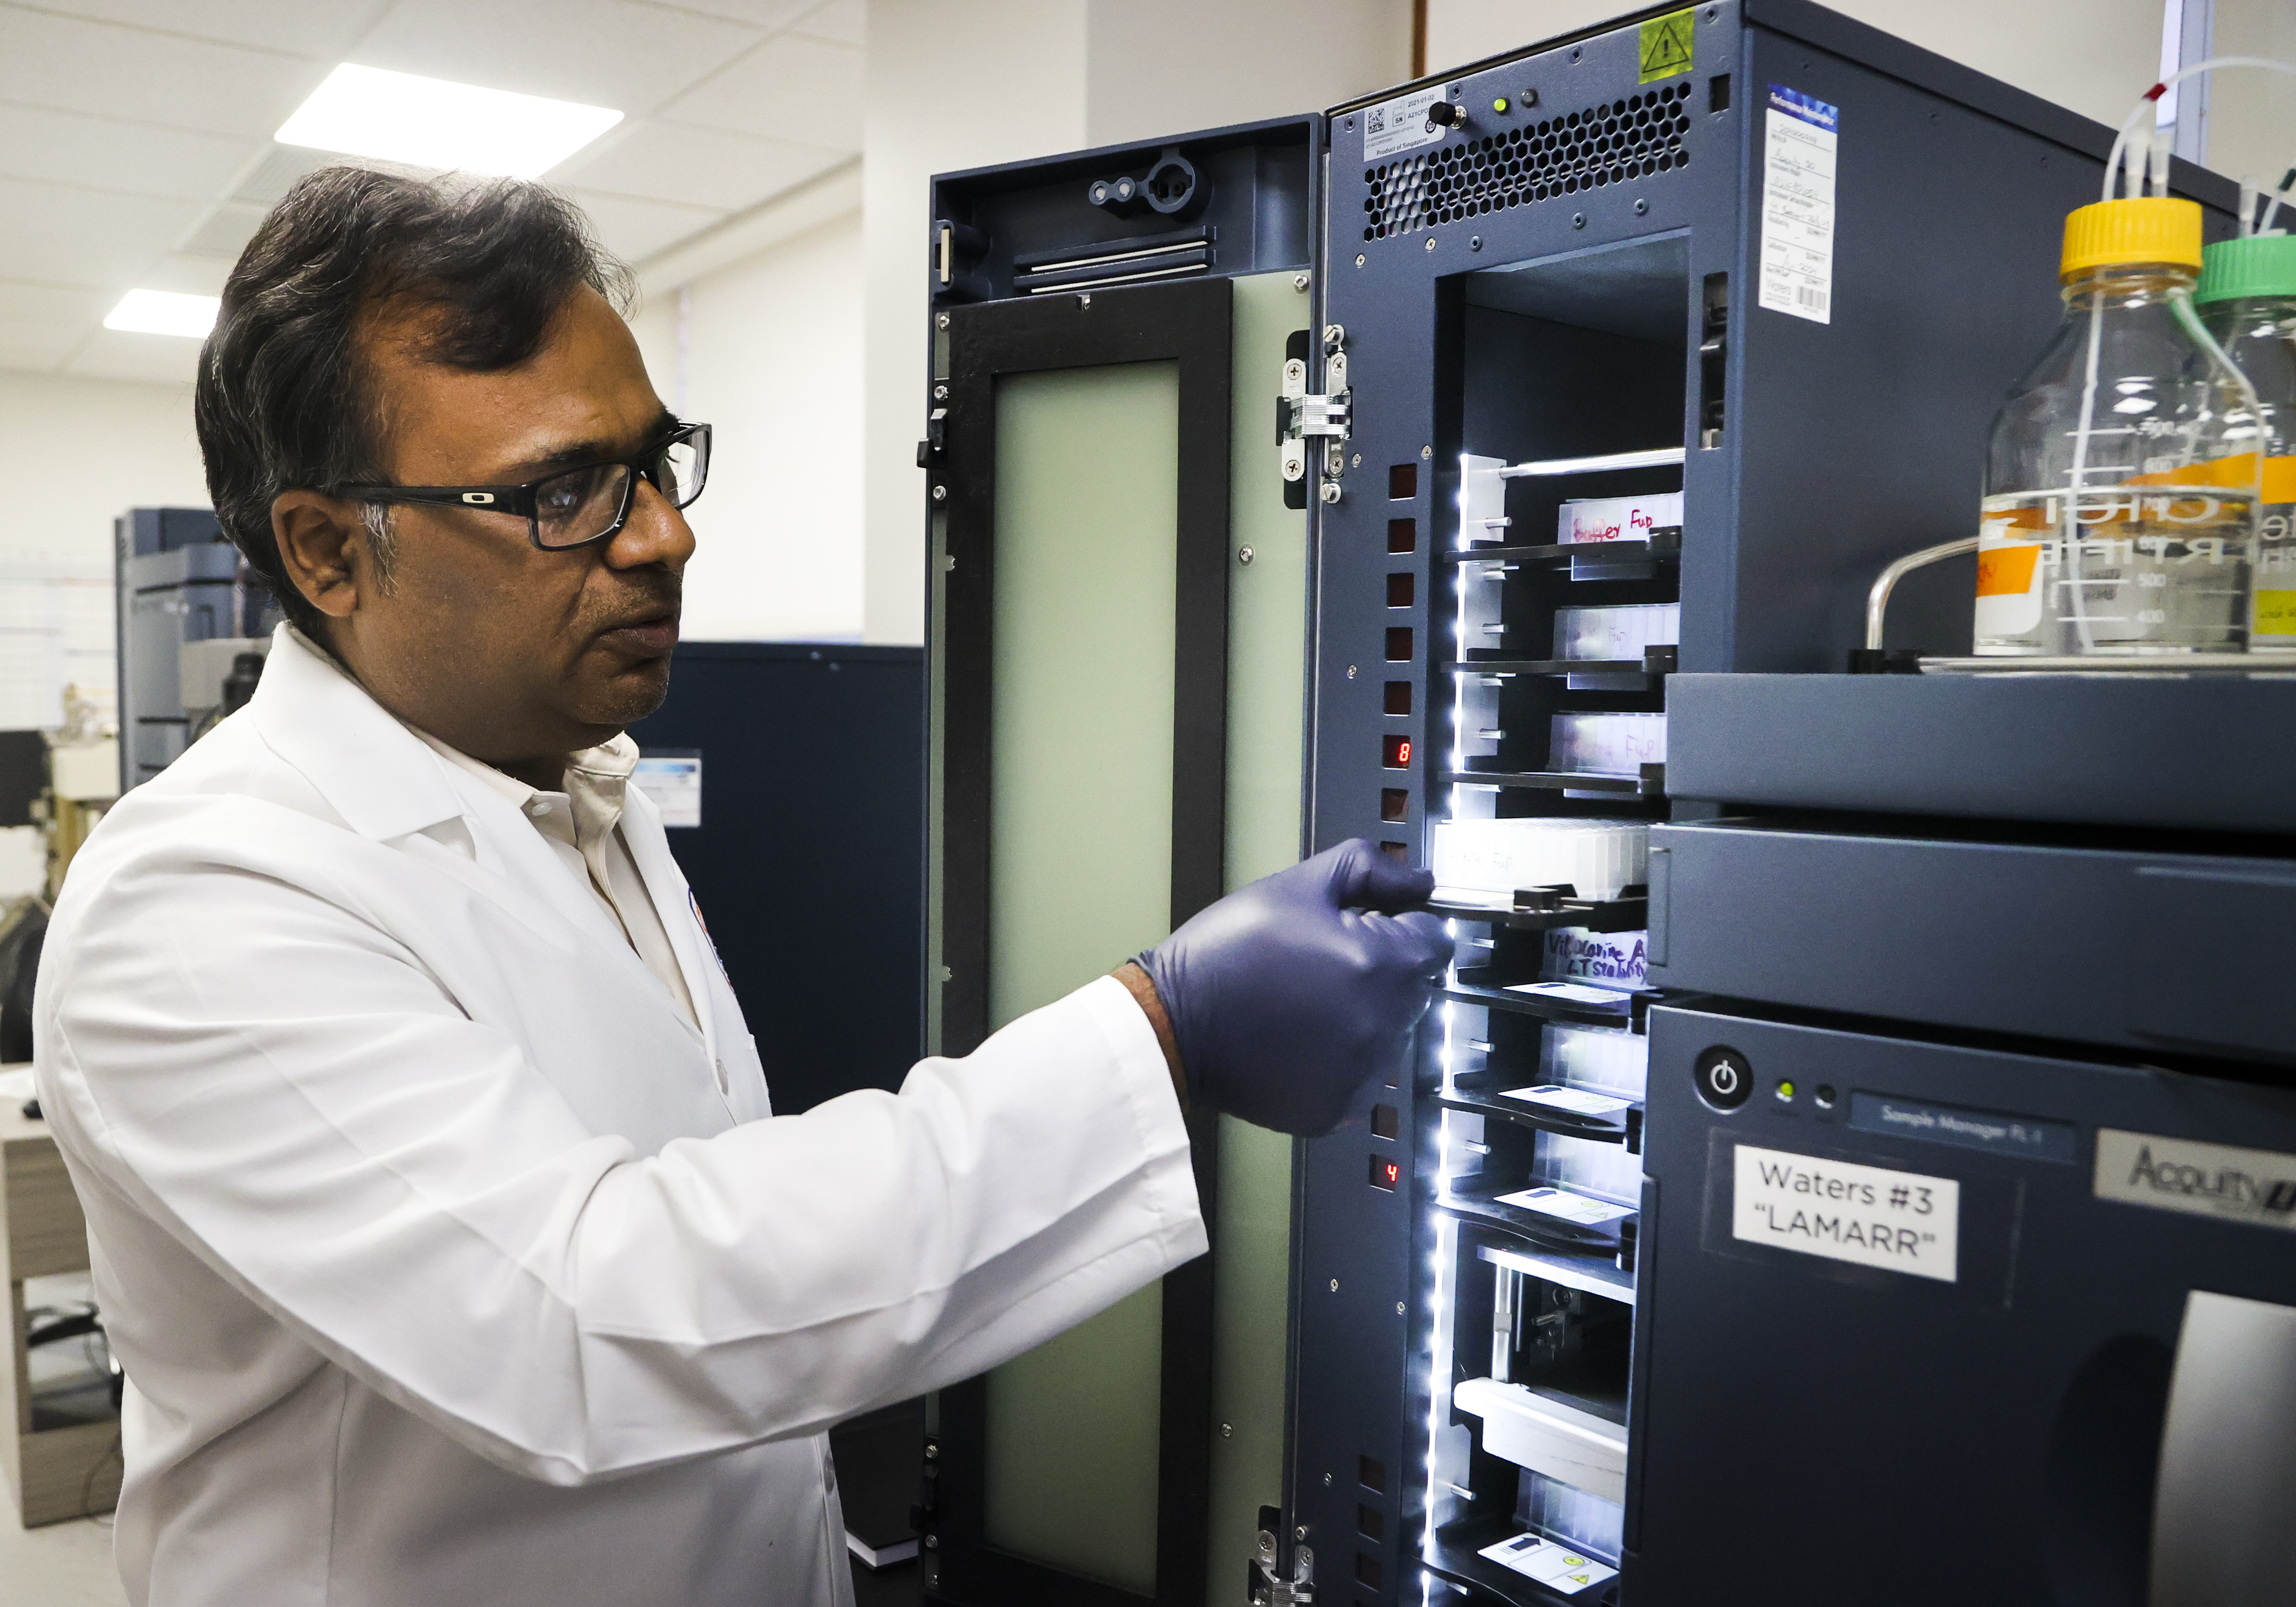 University of Florida researcher Abhisheak Sharma, seen here with
                                    testing equipment, is concerned about highly concentrated kratom
                                    products